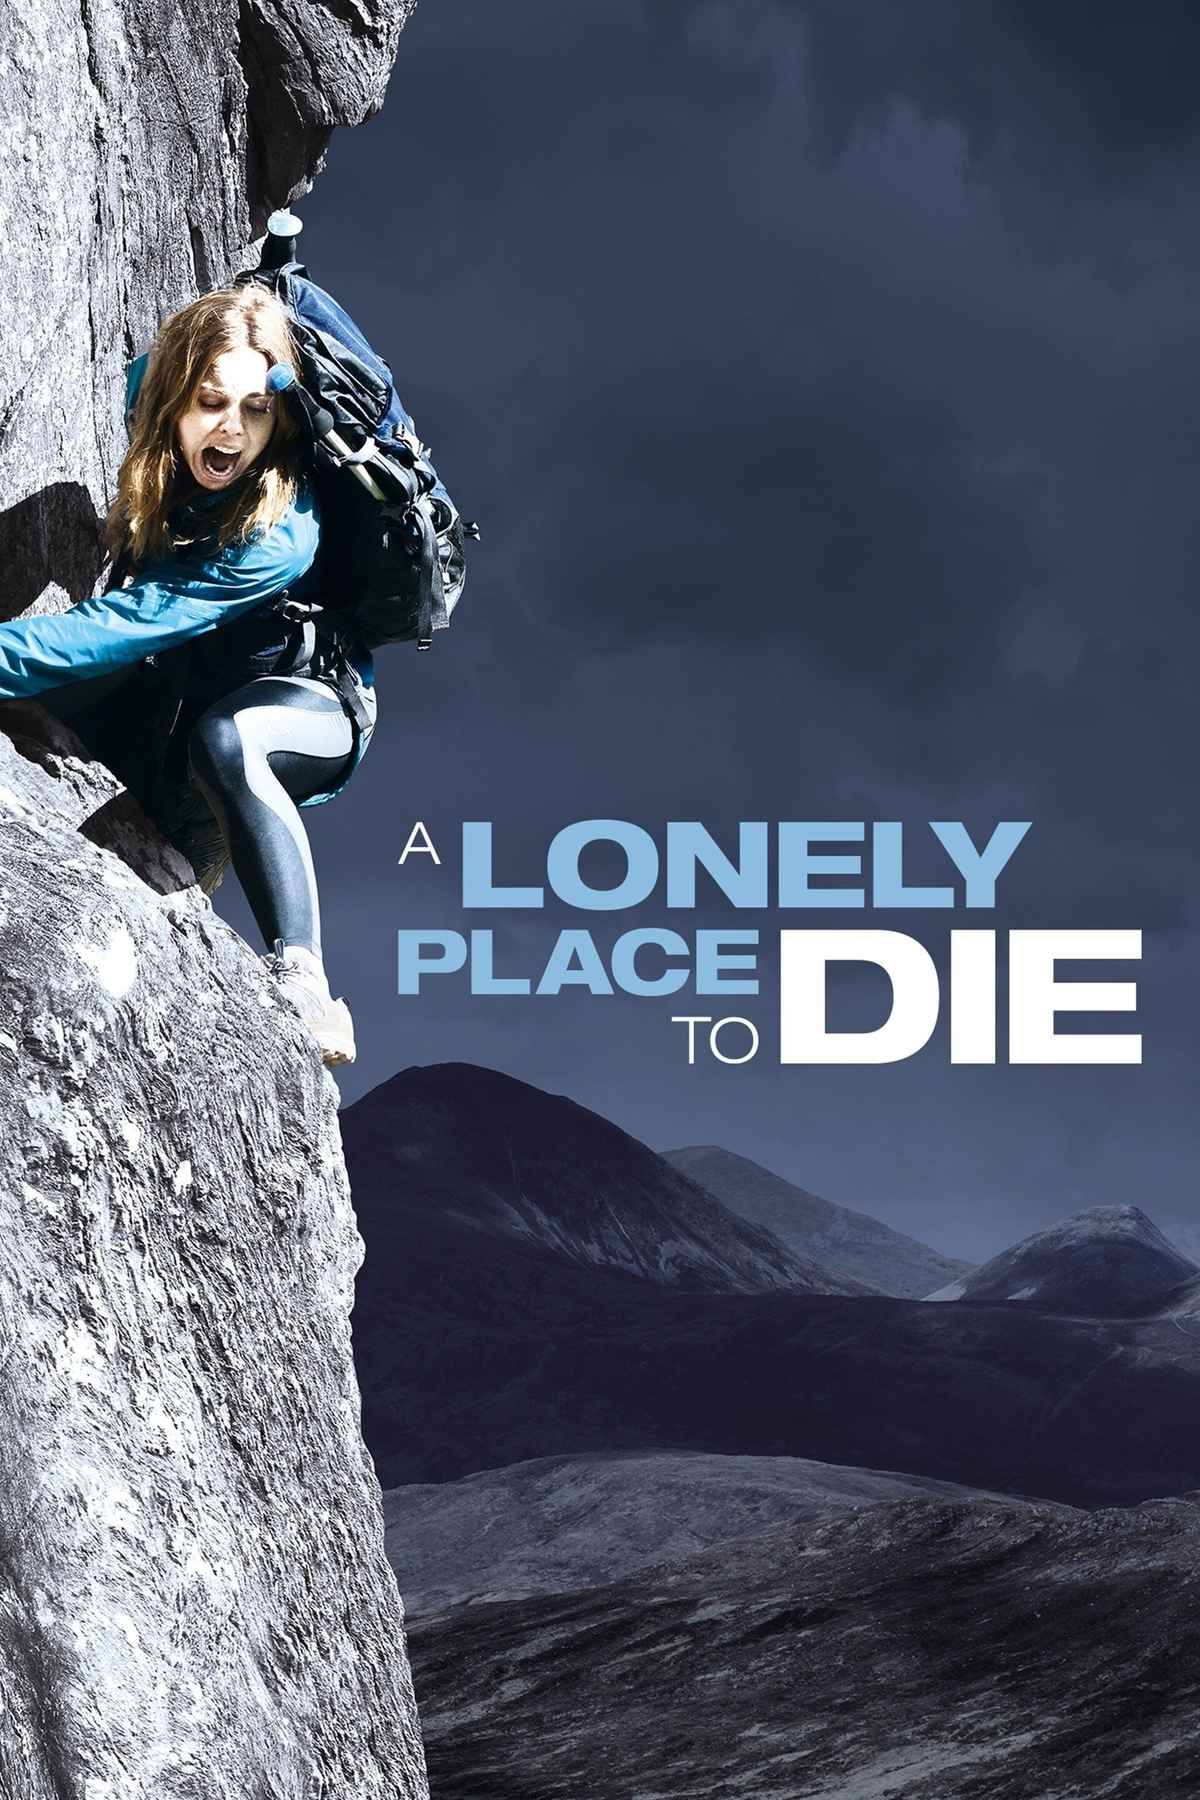 A Lonely Place To Die